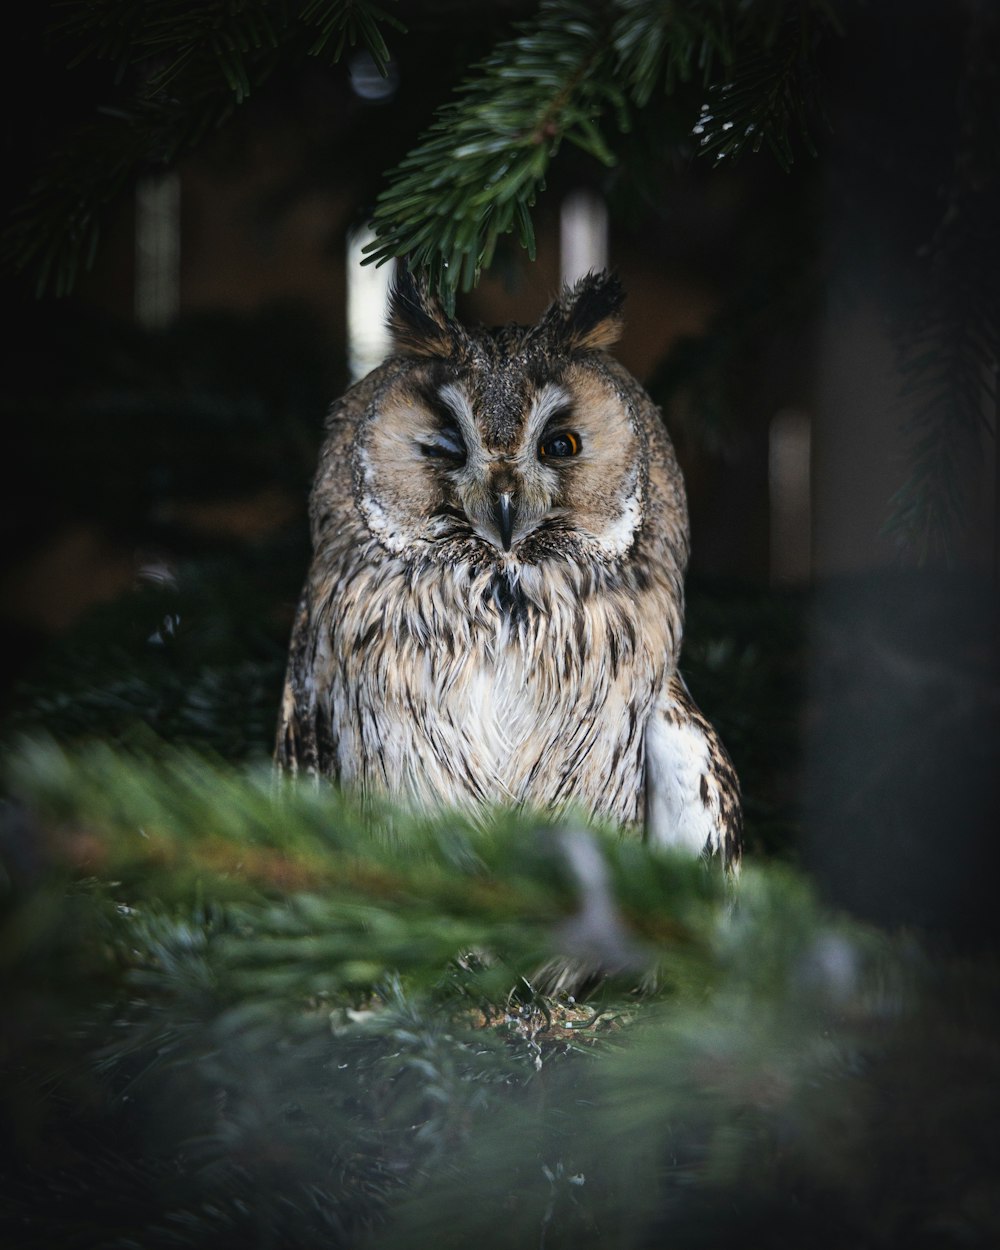 an owl is sitting in a pine tree